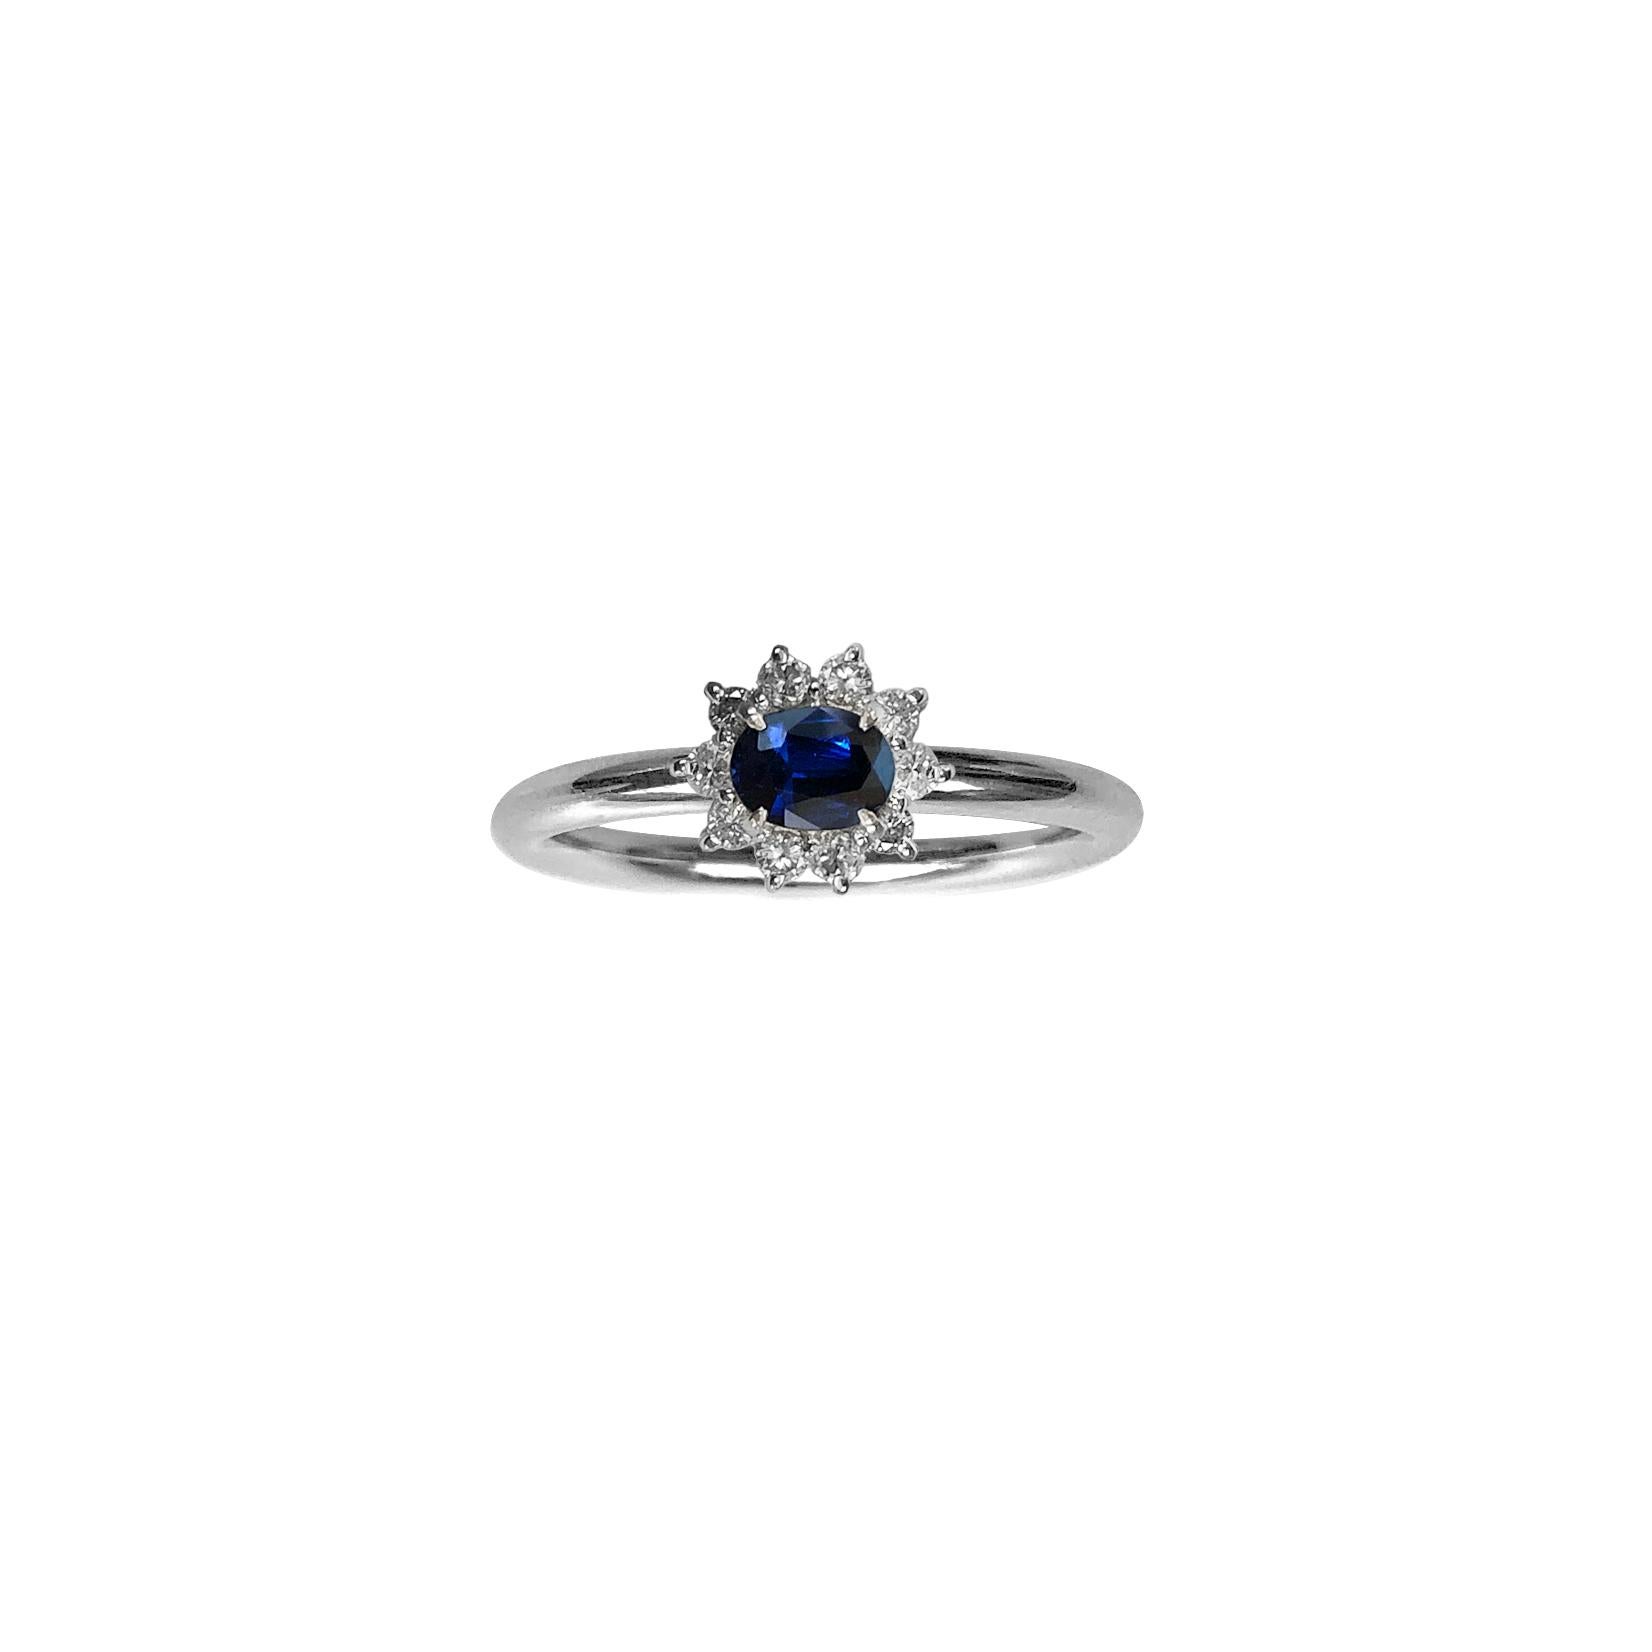 This luxurious platinum ring features deconstructed elements from repurposed vintage Sapphire stone settings in the center. These rare and classic settings were made by highly skilled craftsmen and includes brilliant cut diamonds. This is a